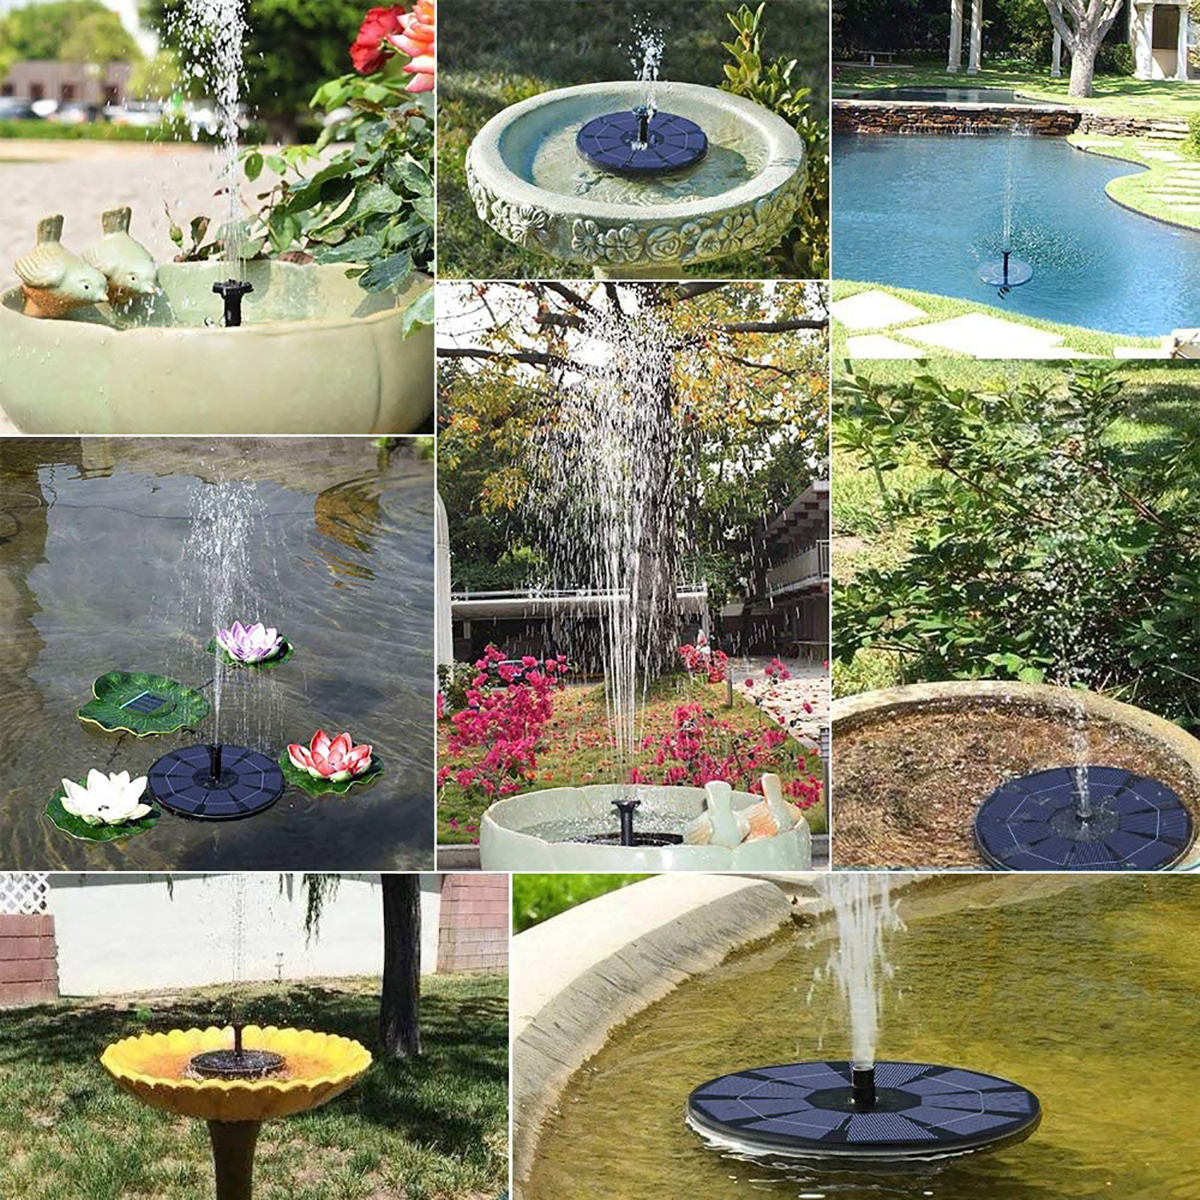 8-in-1-Solar-Bird-Water-Fountain-Set-35W-Circle-Solar-Floating-Pump-Built-in-1600mAH-Battery-for-Wor-1942121-5